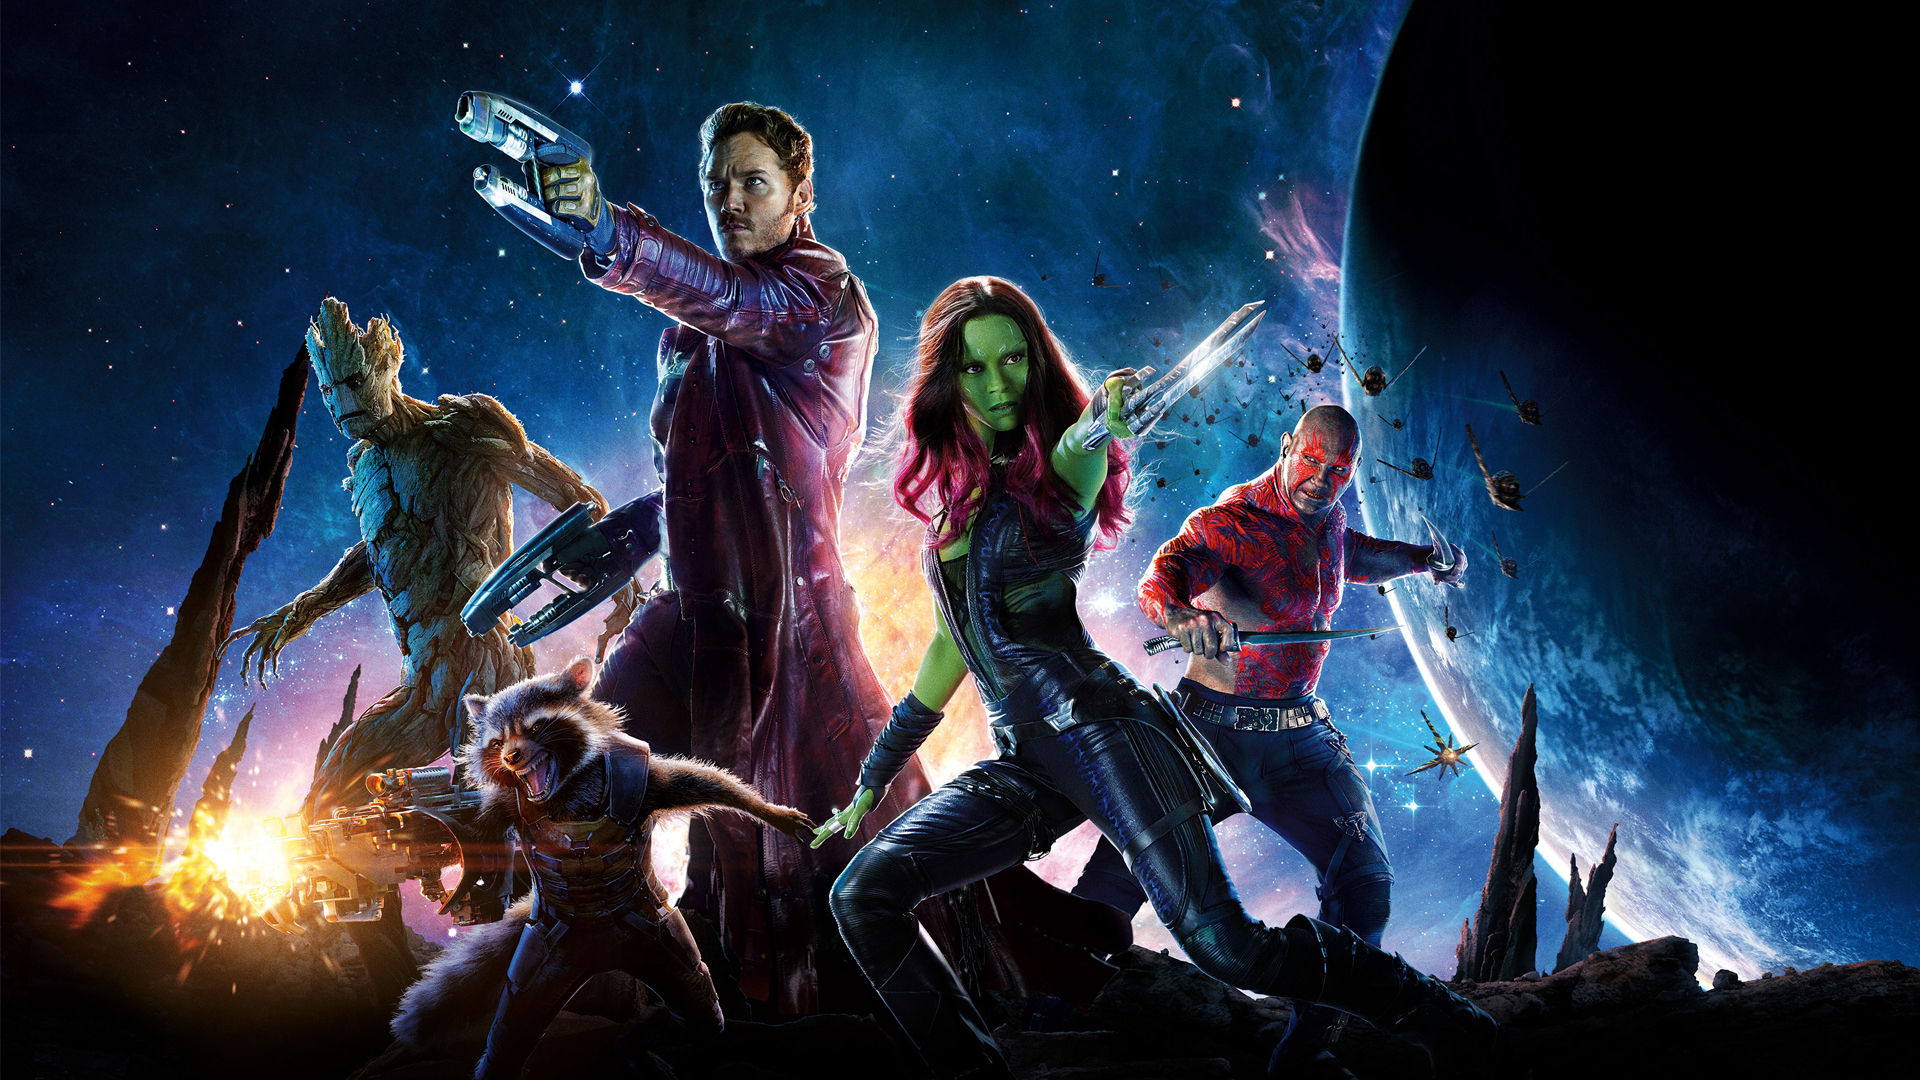 Guardians of the Galaxy Wallpaper 1920x1080 by sachso74 on DeviantArt